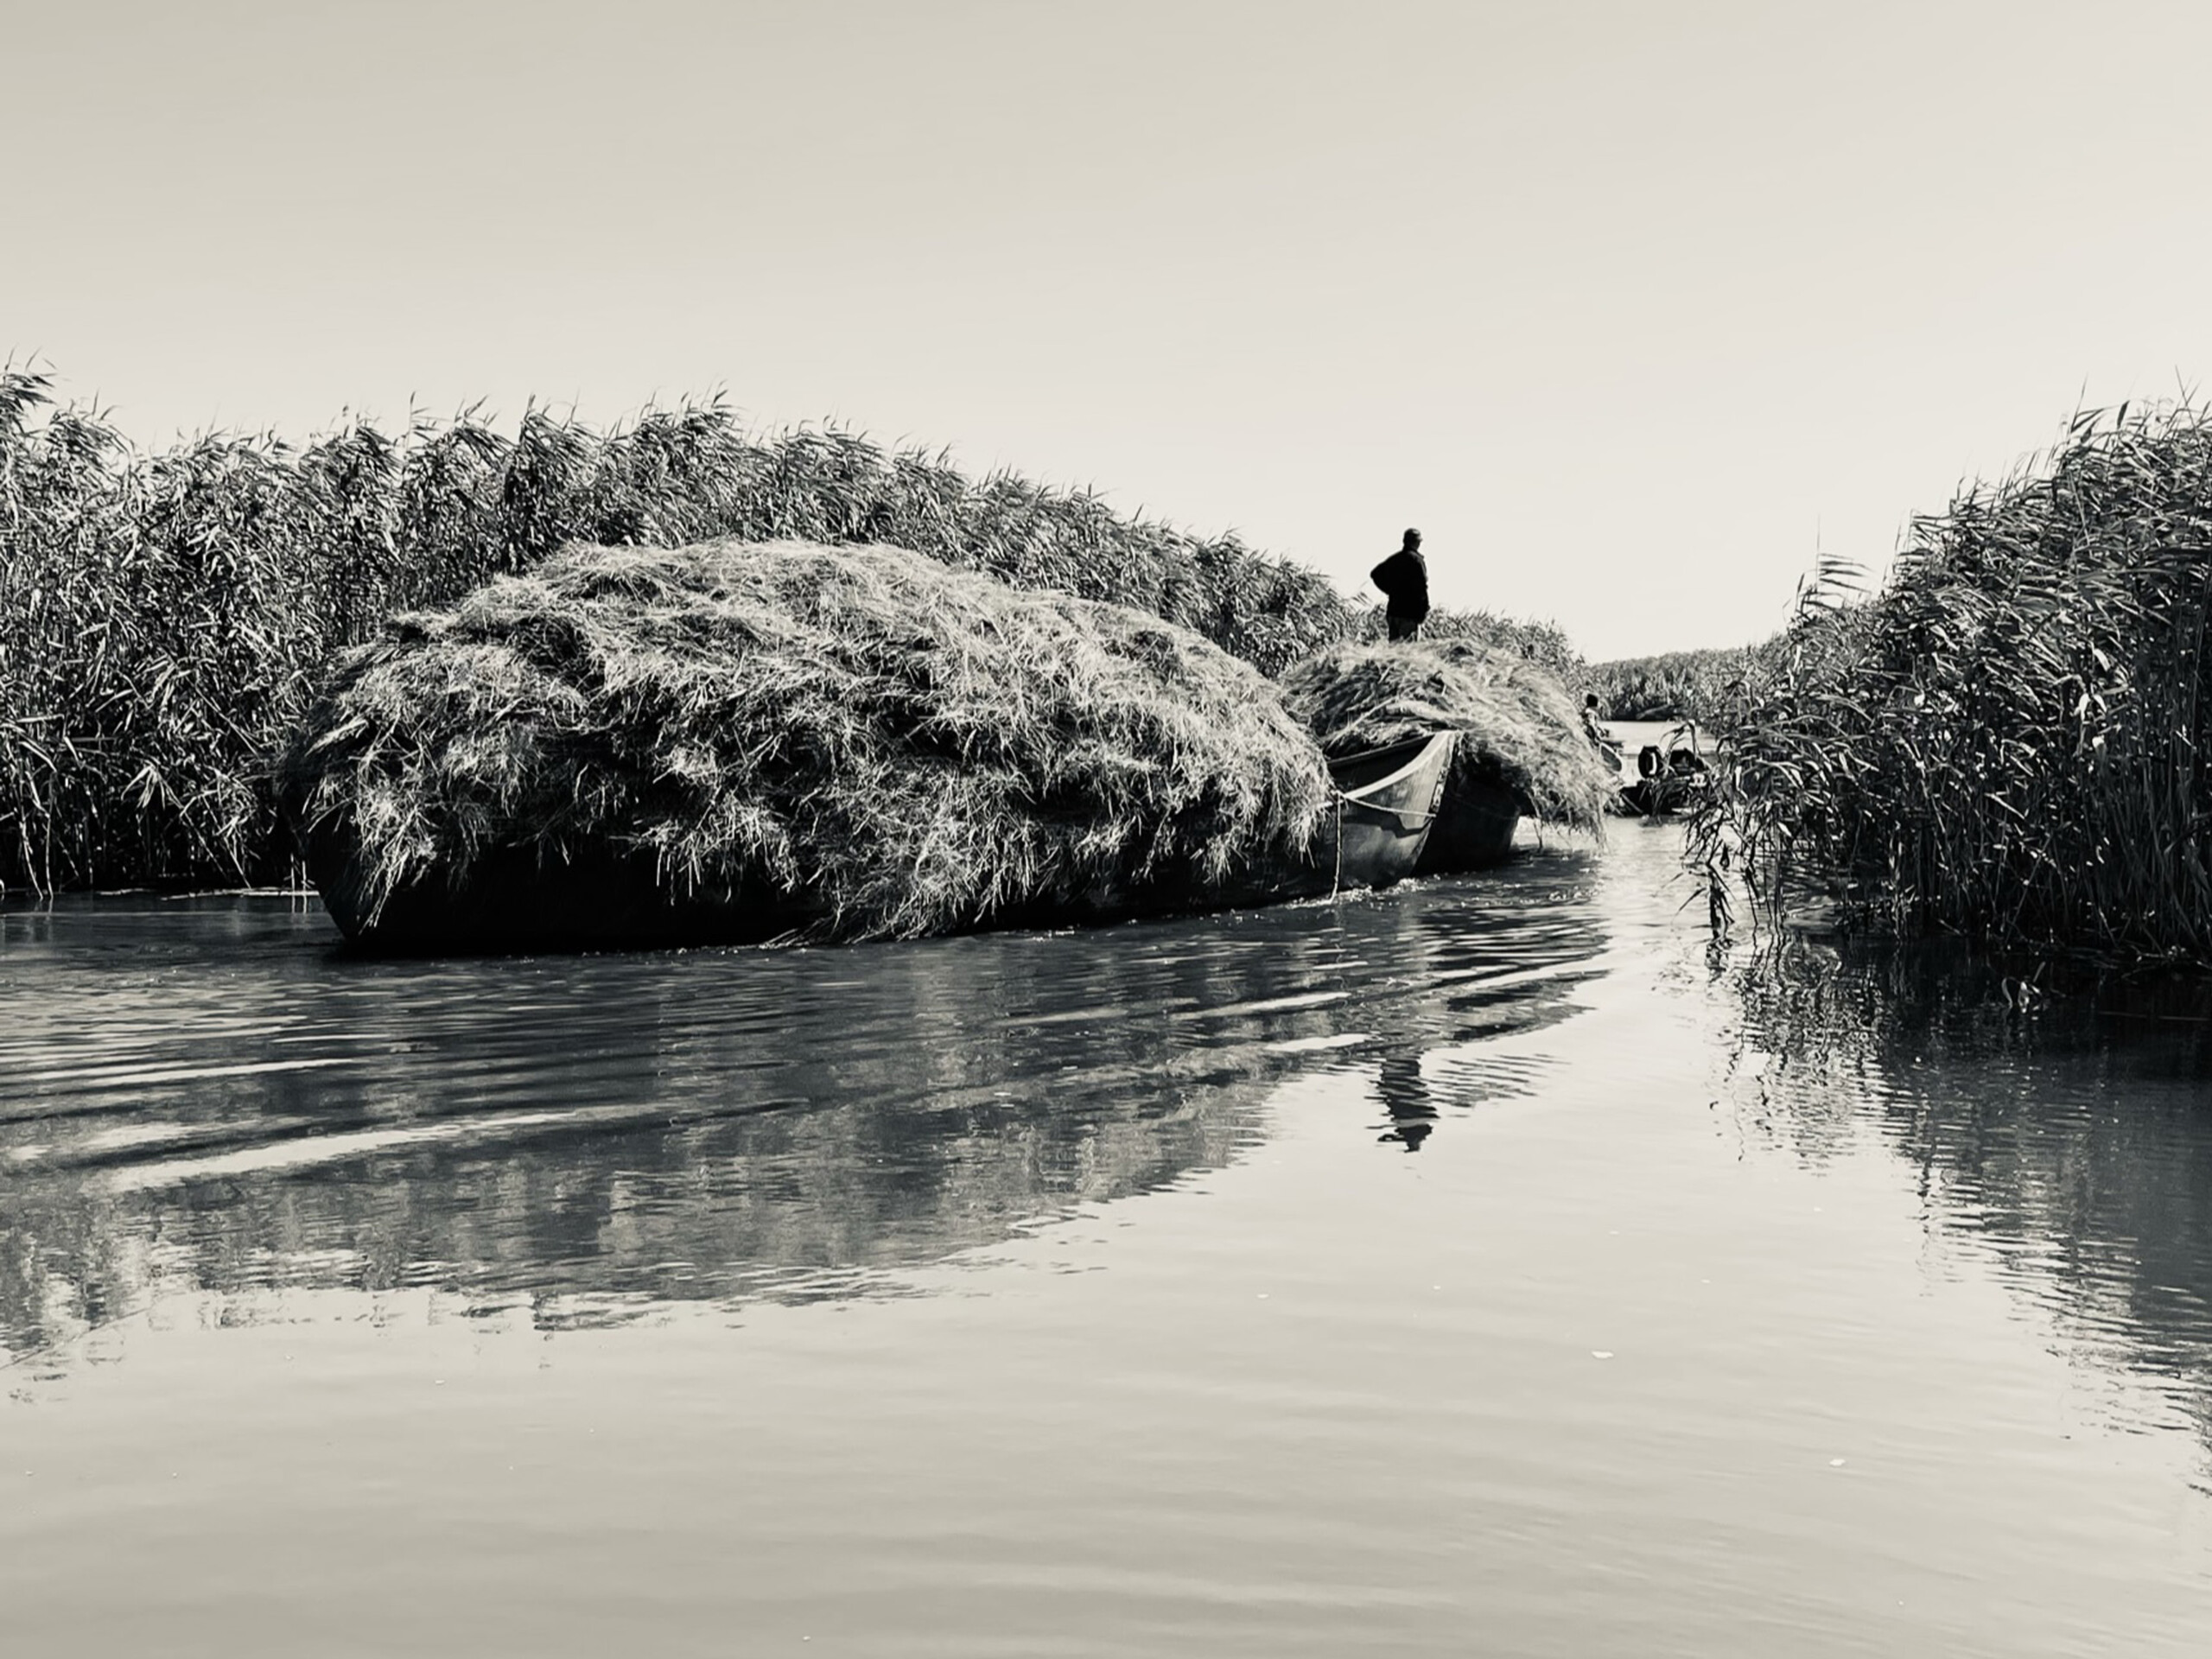 Transport of harvested reeds in the Danube Delta, 2022, Photo Emil Ivanescu